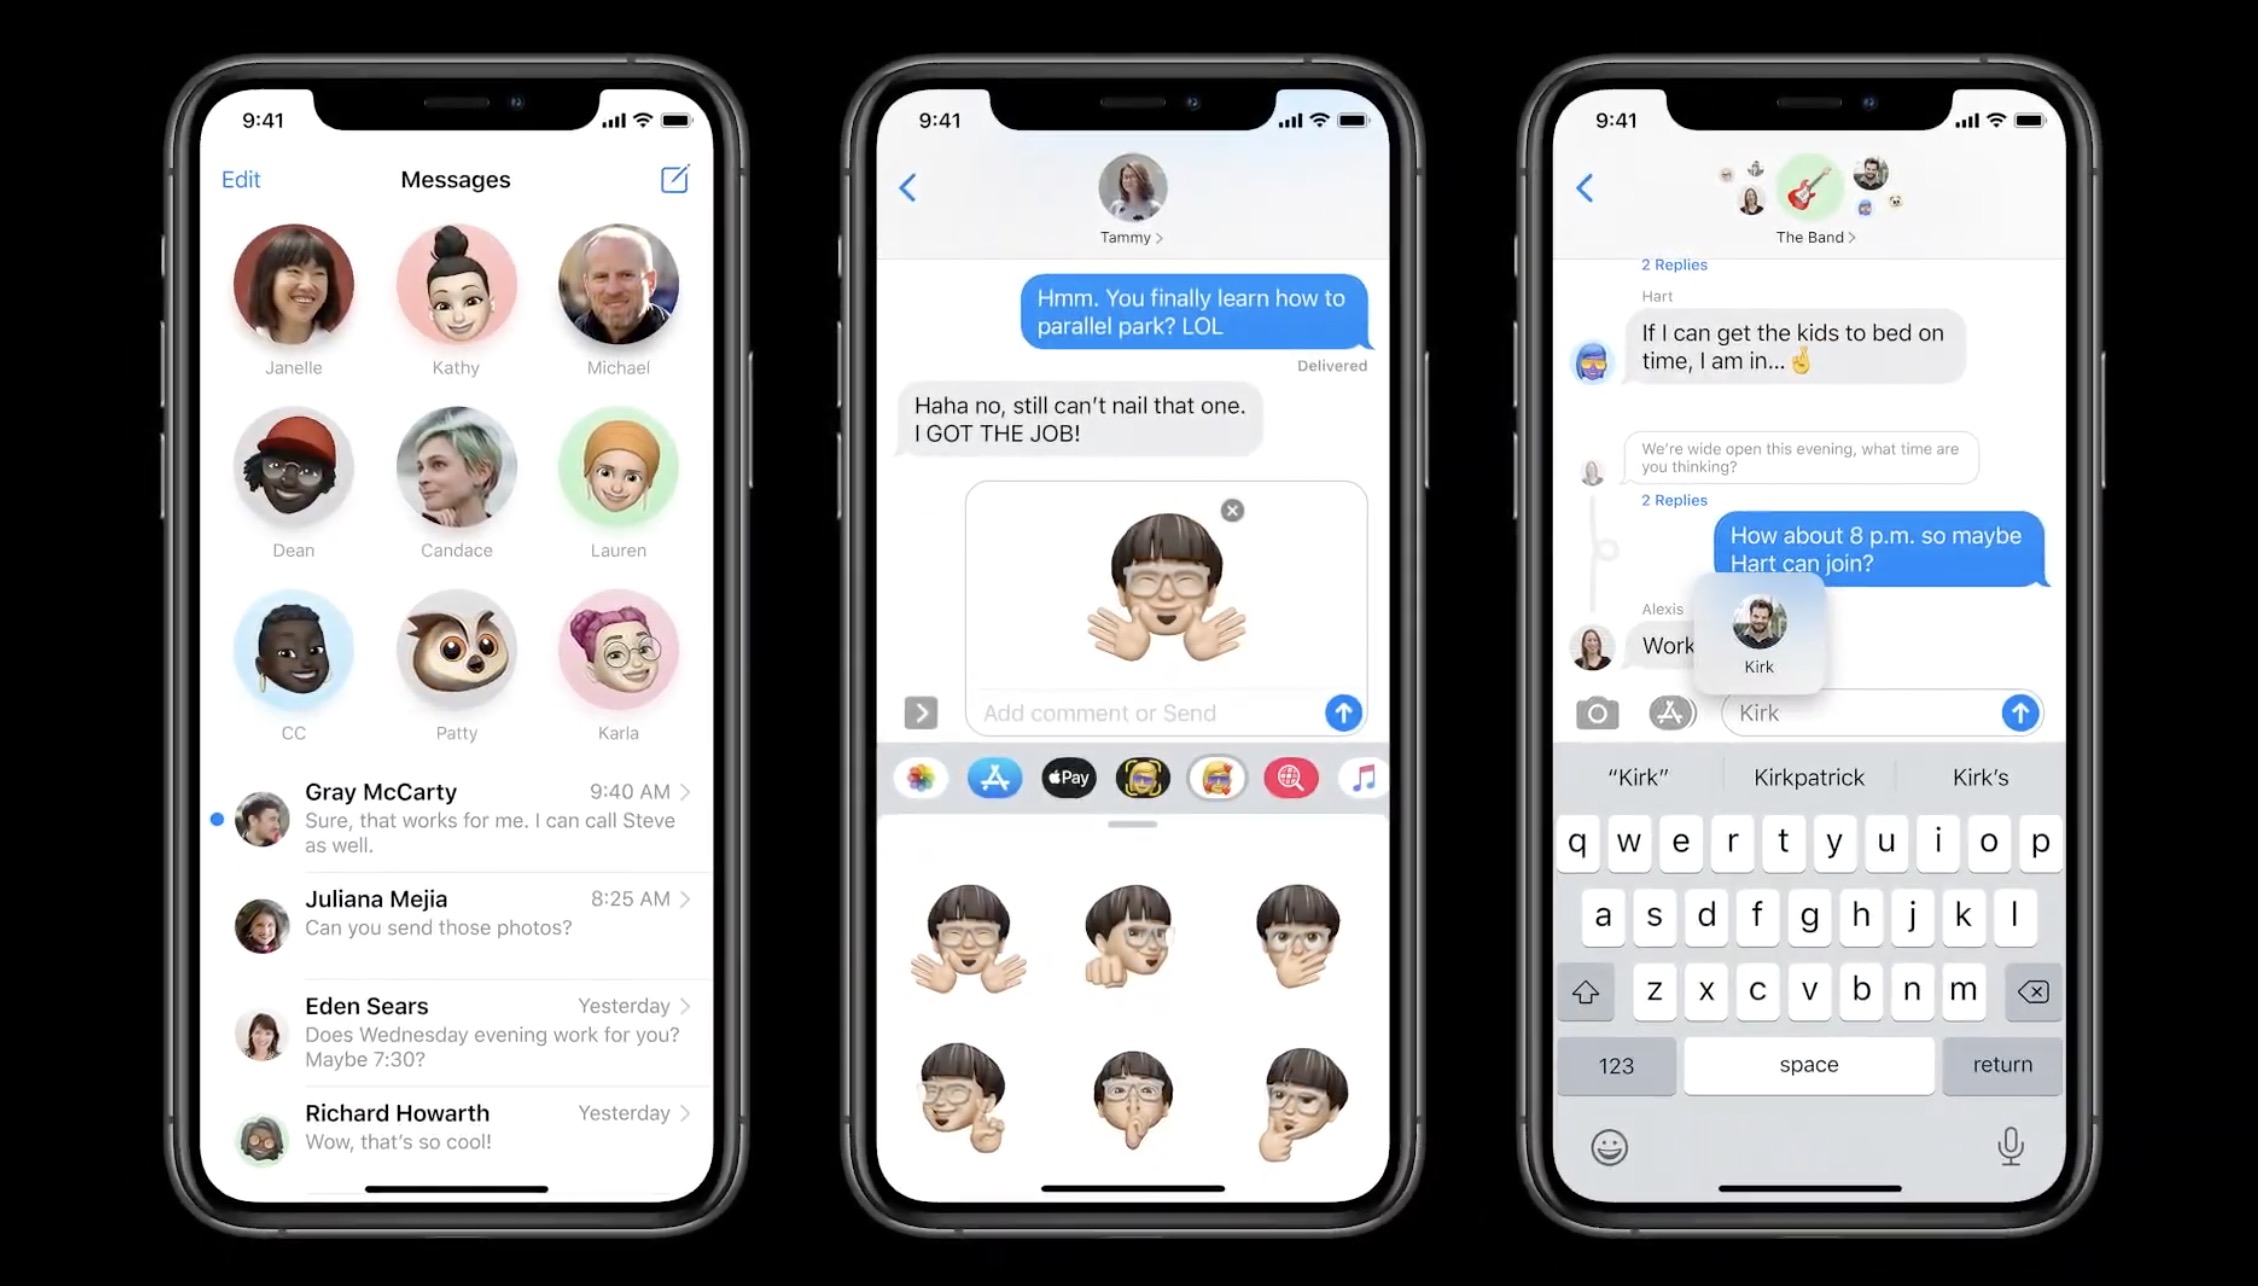 Apple's iMessage update takes cues from Slack with mentions, pins, threads and more | TechCrunch